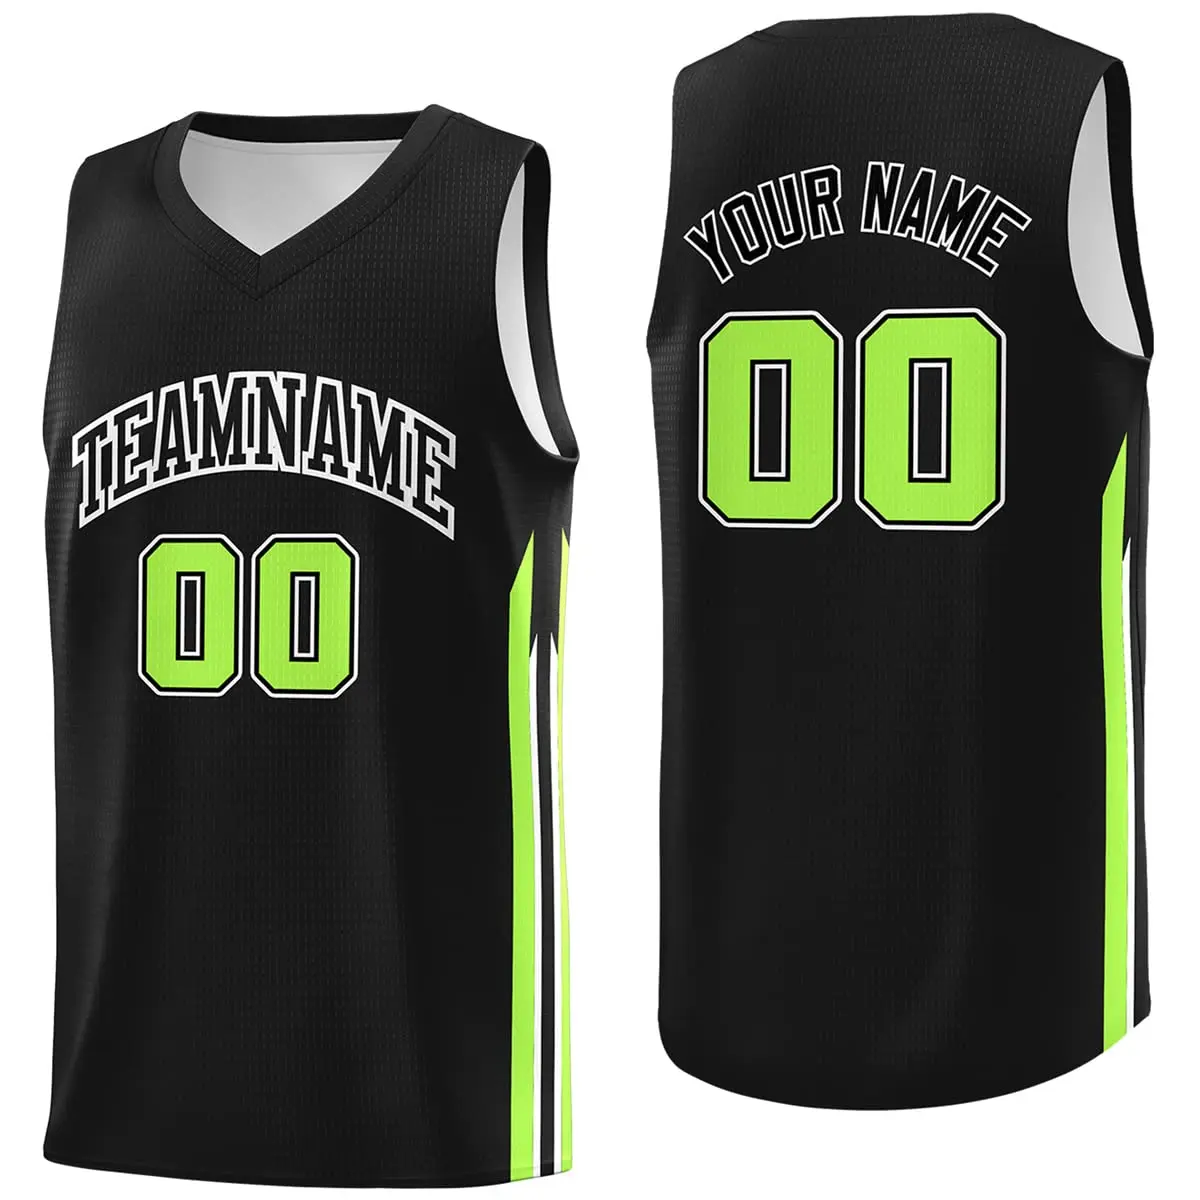 Design Your Own Basketball Jersey